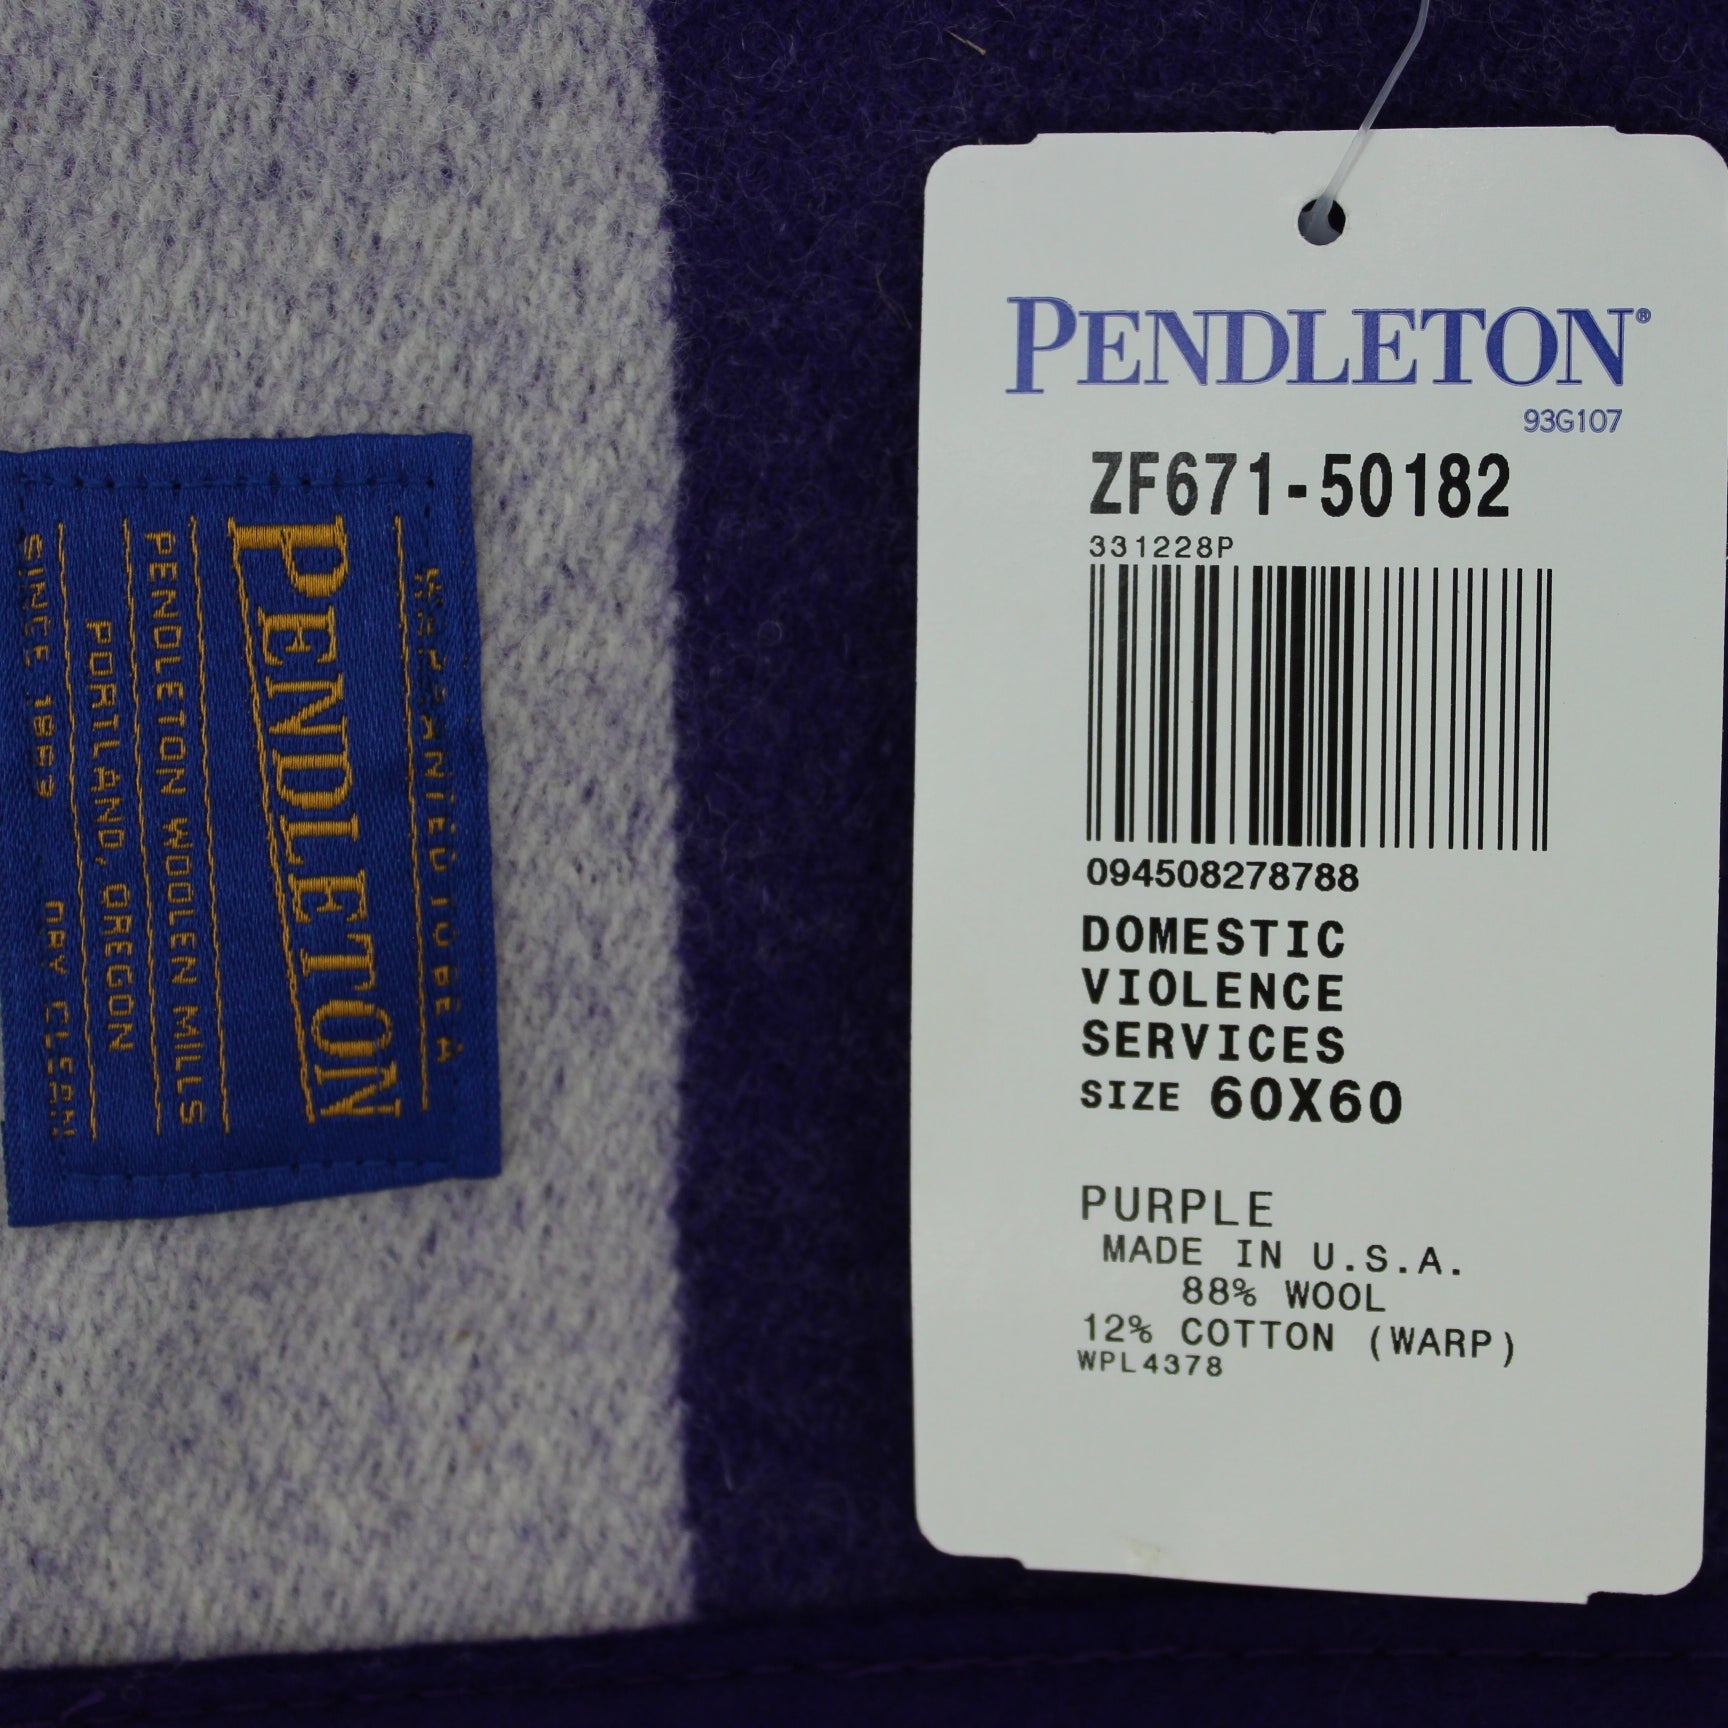 New With Tags Pendleton Wool Cotton Blanket Purple Ribbon Domestic Violence tags with design bar code  numbers